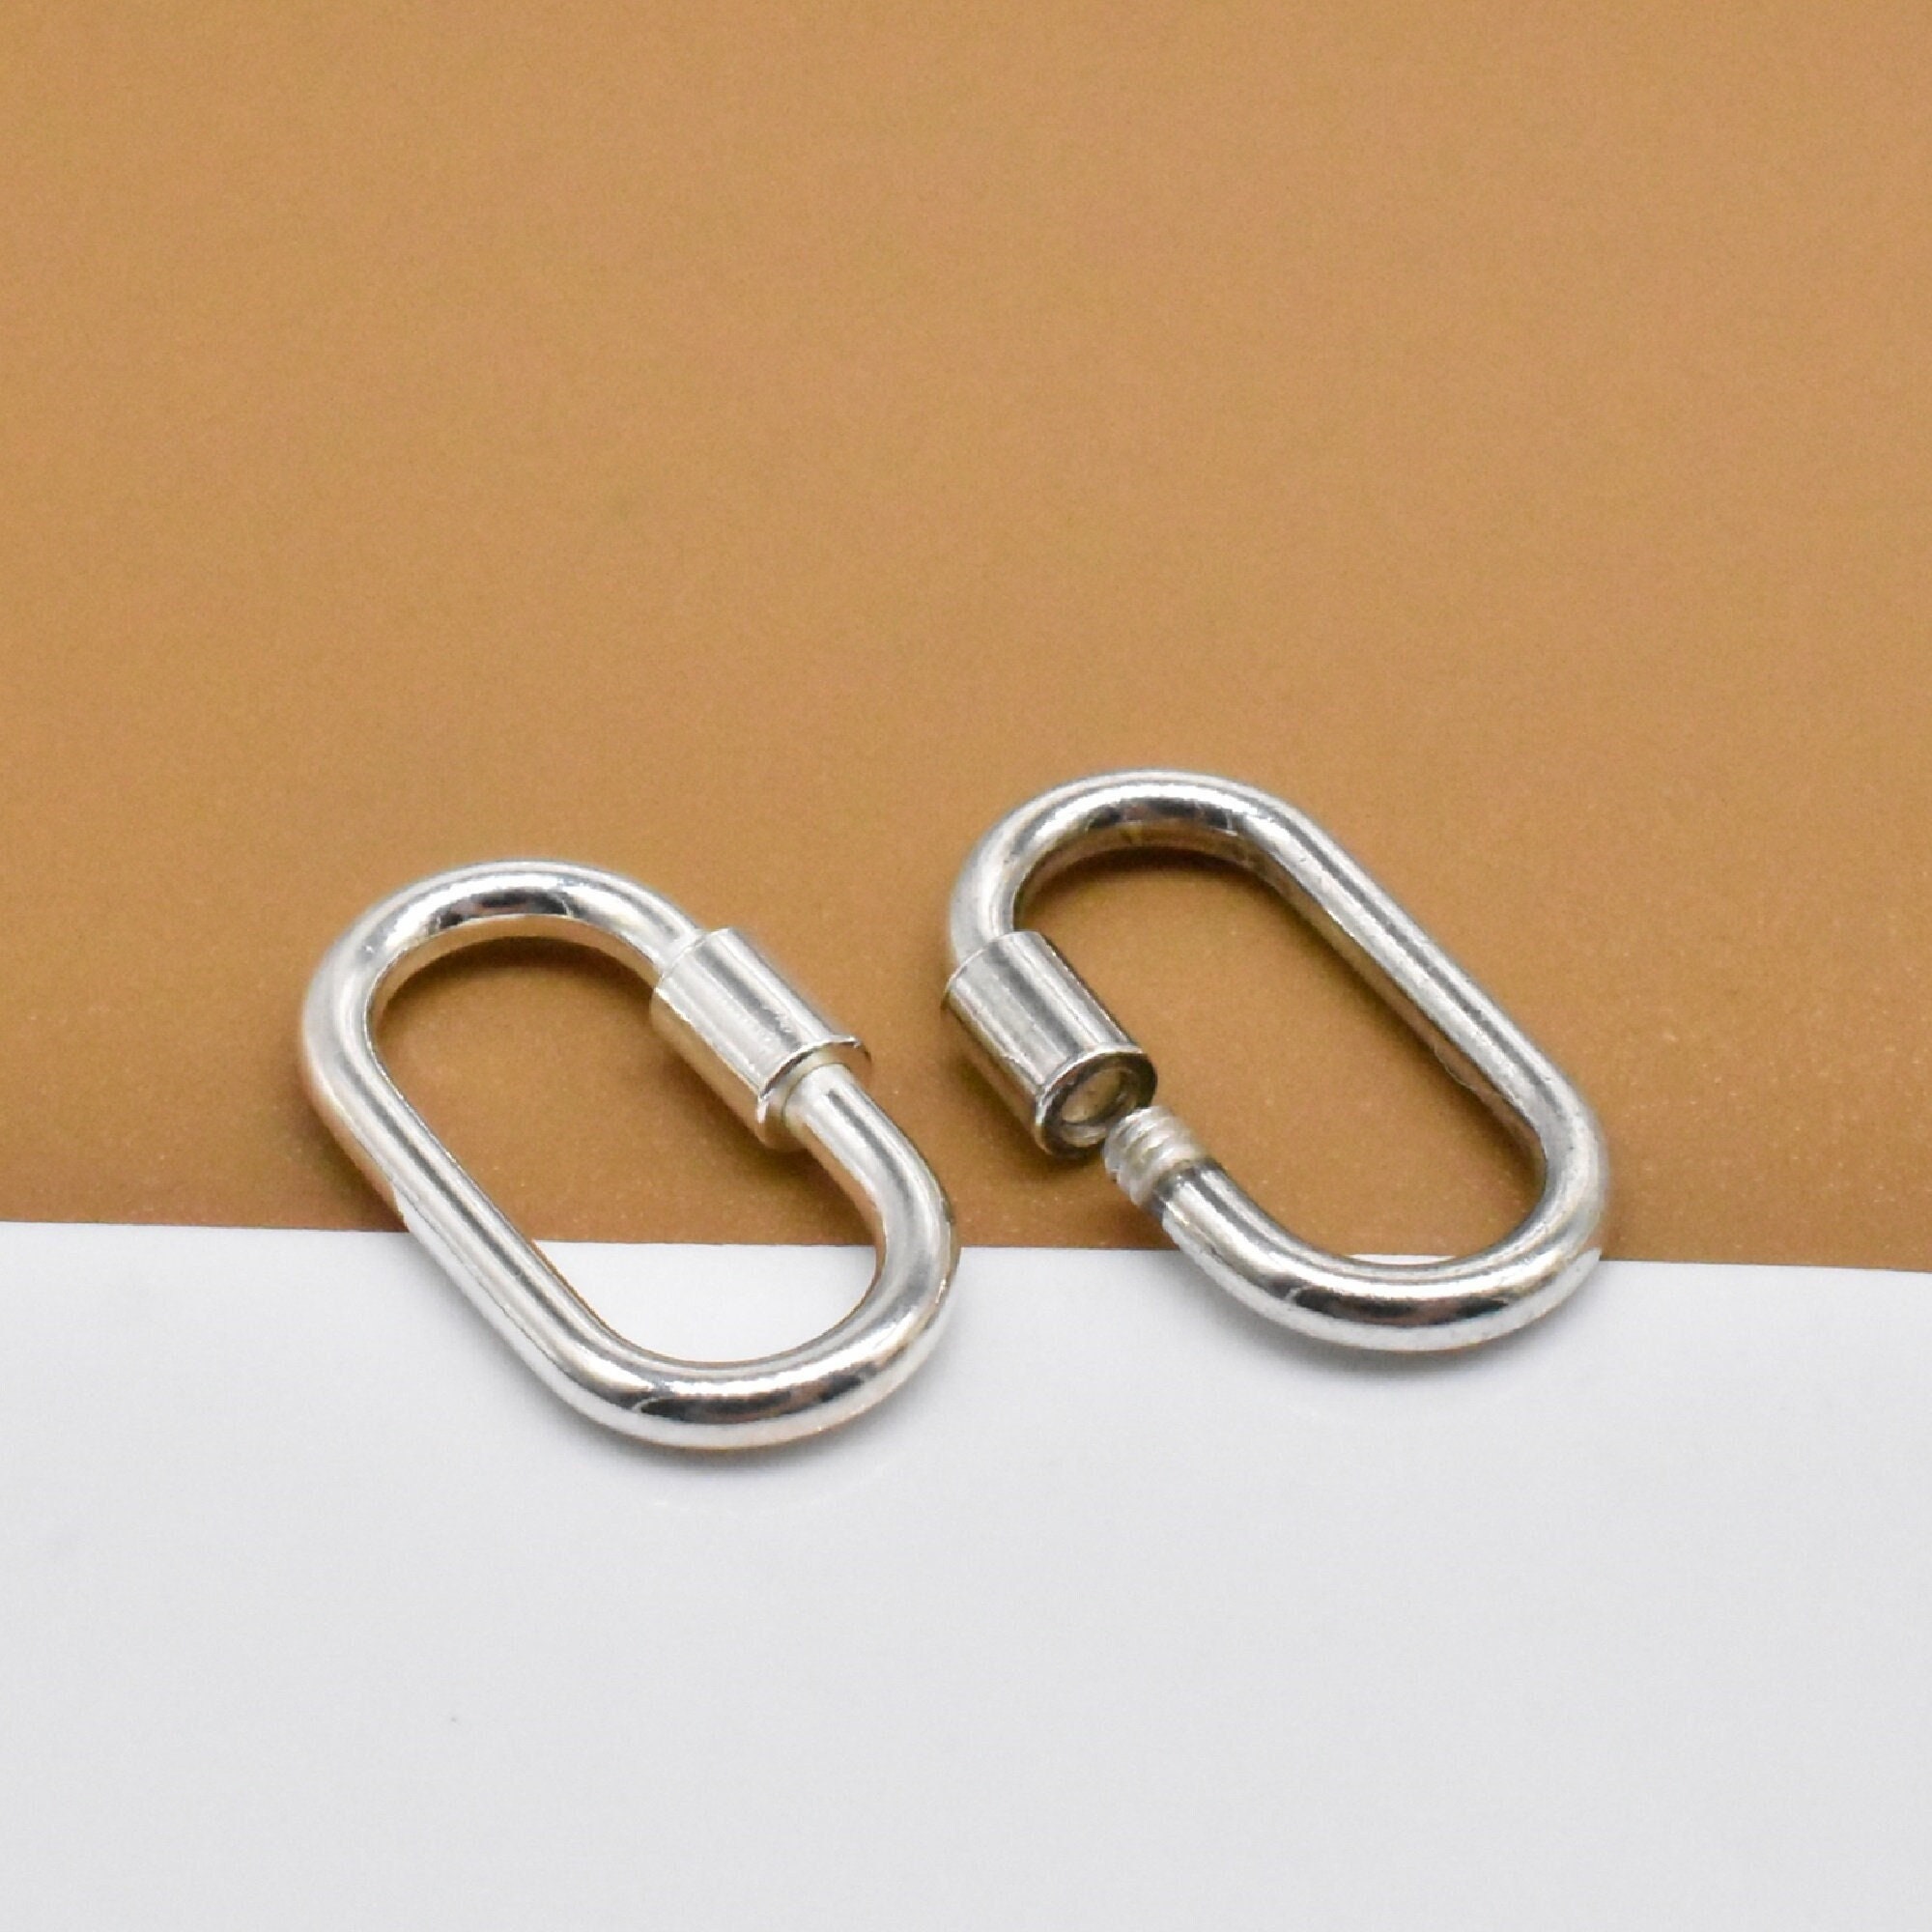 Chain Clasp 120pcs Bracelet Clasp With 840 Bending Rings Chain Clasps  Jewellery Clasp Carabiner Clasp Clasps For Jewellery Making